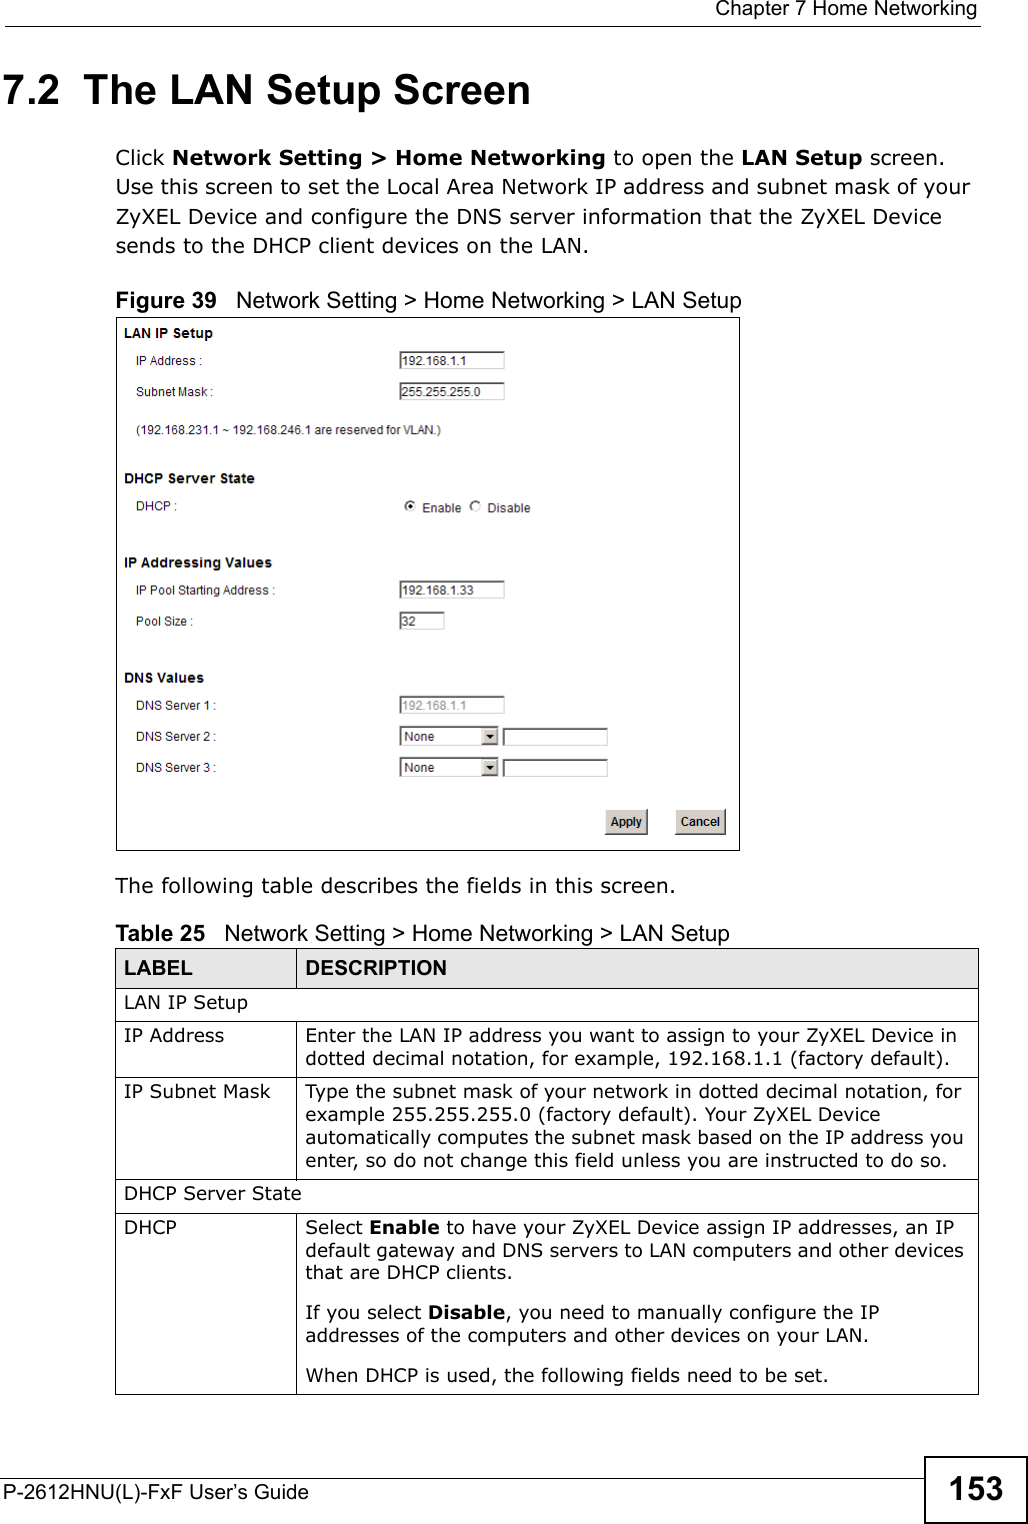  Chapter 7 Home NetworkingP-2612HNU(L)-FxF User’s Guide 1537.2  The LAN Setup ScreenClick Network Setting &gt; Home Networking to open the LAN Setup screen. Use this screen to set the Local Area Network IP address and subnet mask of yourZyXEL Device and configure the DNS server information that the ZyXEL Device sends to the DHCP client devices on the LAN.Figure 39   Network Setting &gt; Home Networking &gt; LAN Setup The following table describes the fields in this screen.  Table 25   Network Setting &gt; Home Networking &gt; LAN Setup LABEL DESCRIPTIONLAN IP SetupIP Address Enter the LAN IP address you want to assign to your ZyXEL Device in dotted decimal notation, for example, 192.168.1.1 (factory default).IP Subnet Mask  Type the subnet mask of your network in dotted decimal notation, for example 255.255.255.0 (factory default). Your ZyXEL Device automatically computes the subnet mask based on the IP address you enter, so do not change this field unless you are instructed to do so.DHCP Server StateDHCP Select Enable to have your ZyXEL Device assign IP addresses, an IP default gateway and DNS servers to LAN computers and other devices that are DHCP clients.If you select Disable, you need to manually configure the IP addresses of the computers and other devices on your LAN.When DHCP is used, the following fields need to be set.